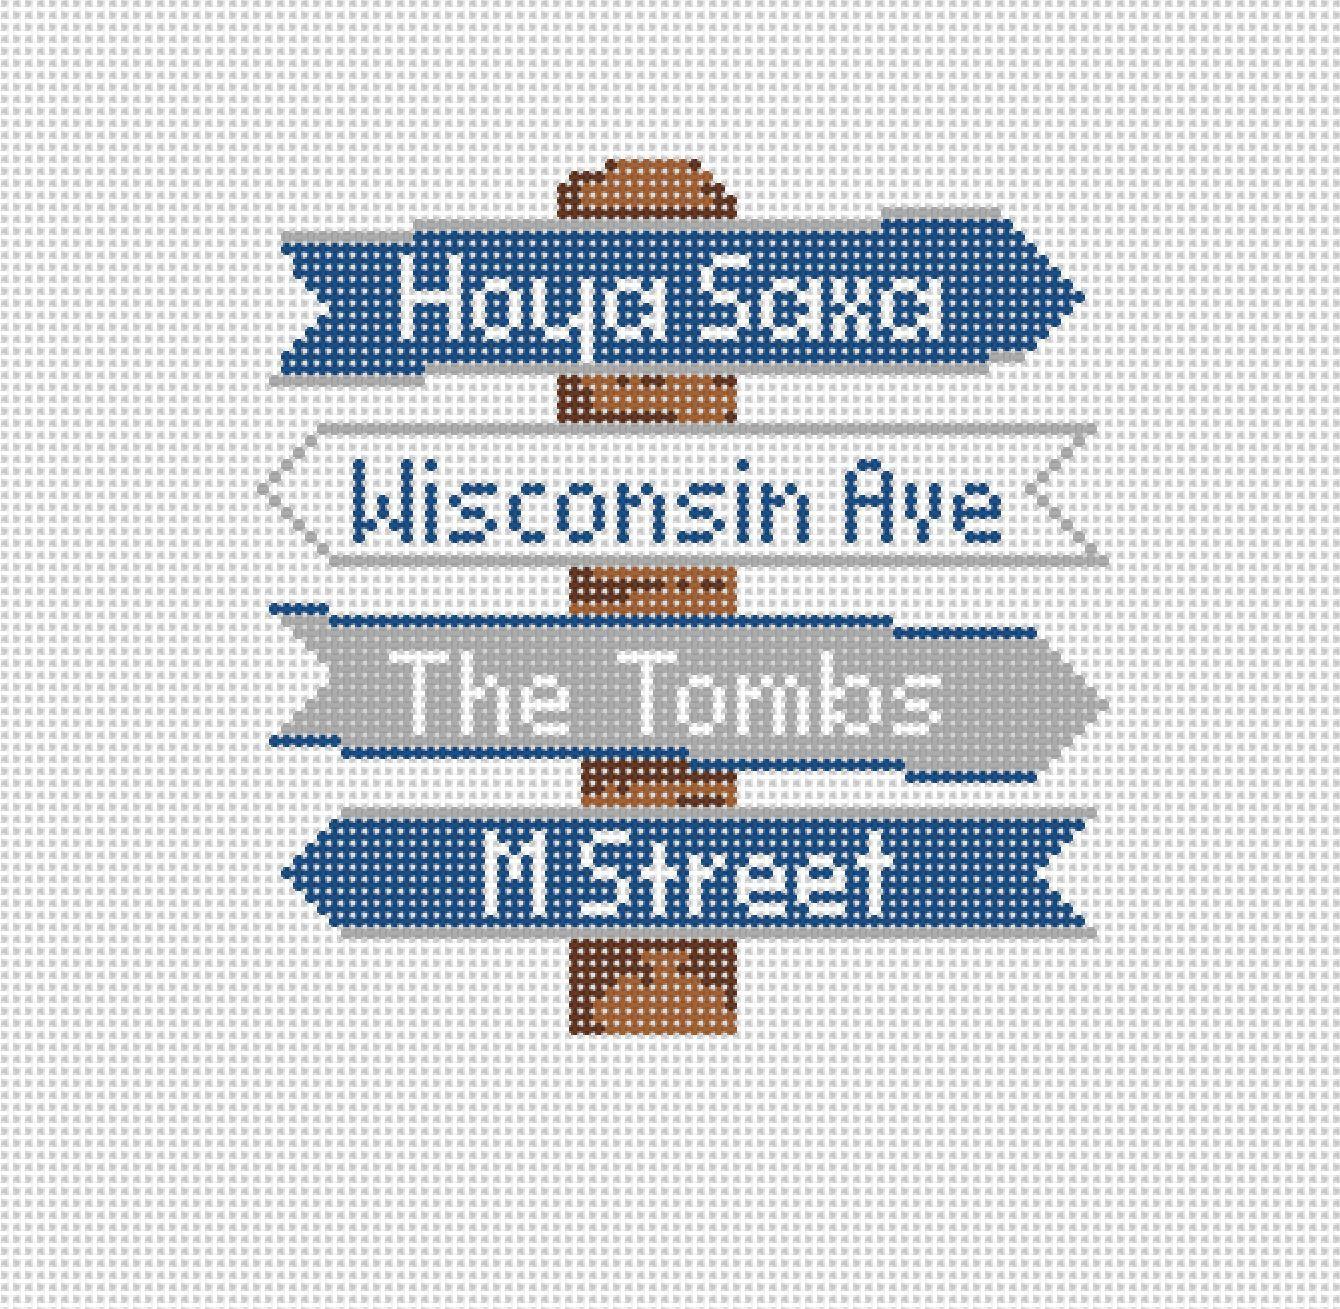 Georgetown College Icon Destination Sign - Needlepoint by Laura